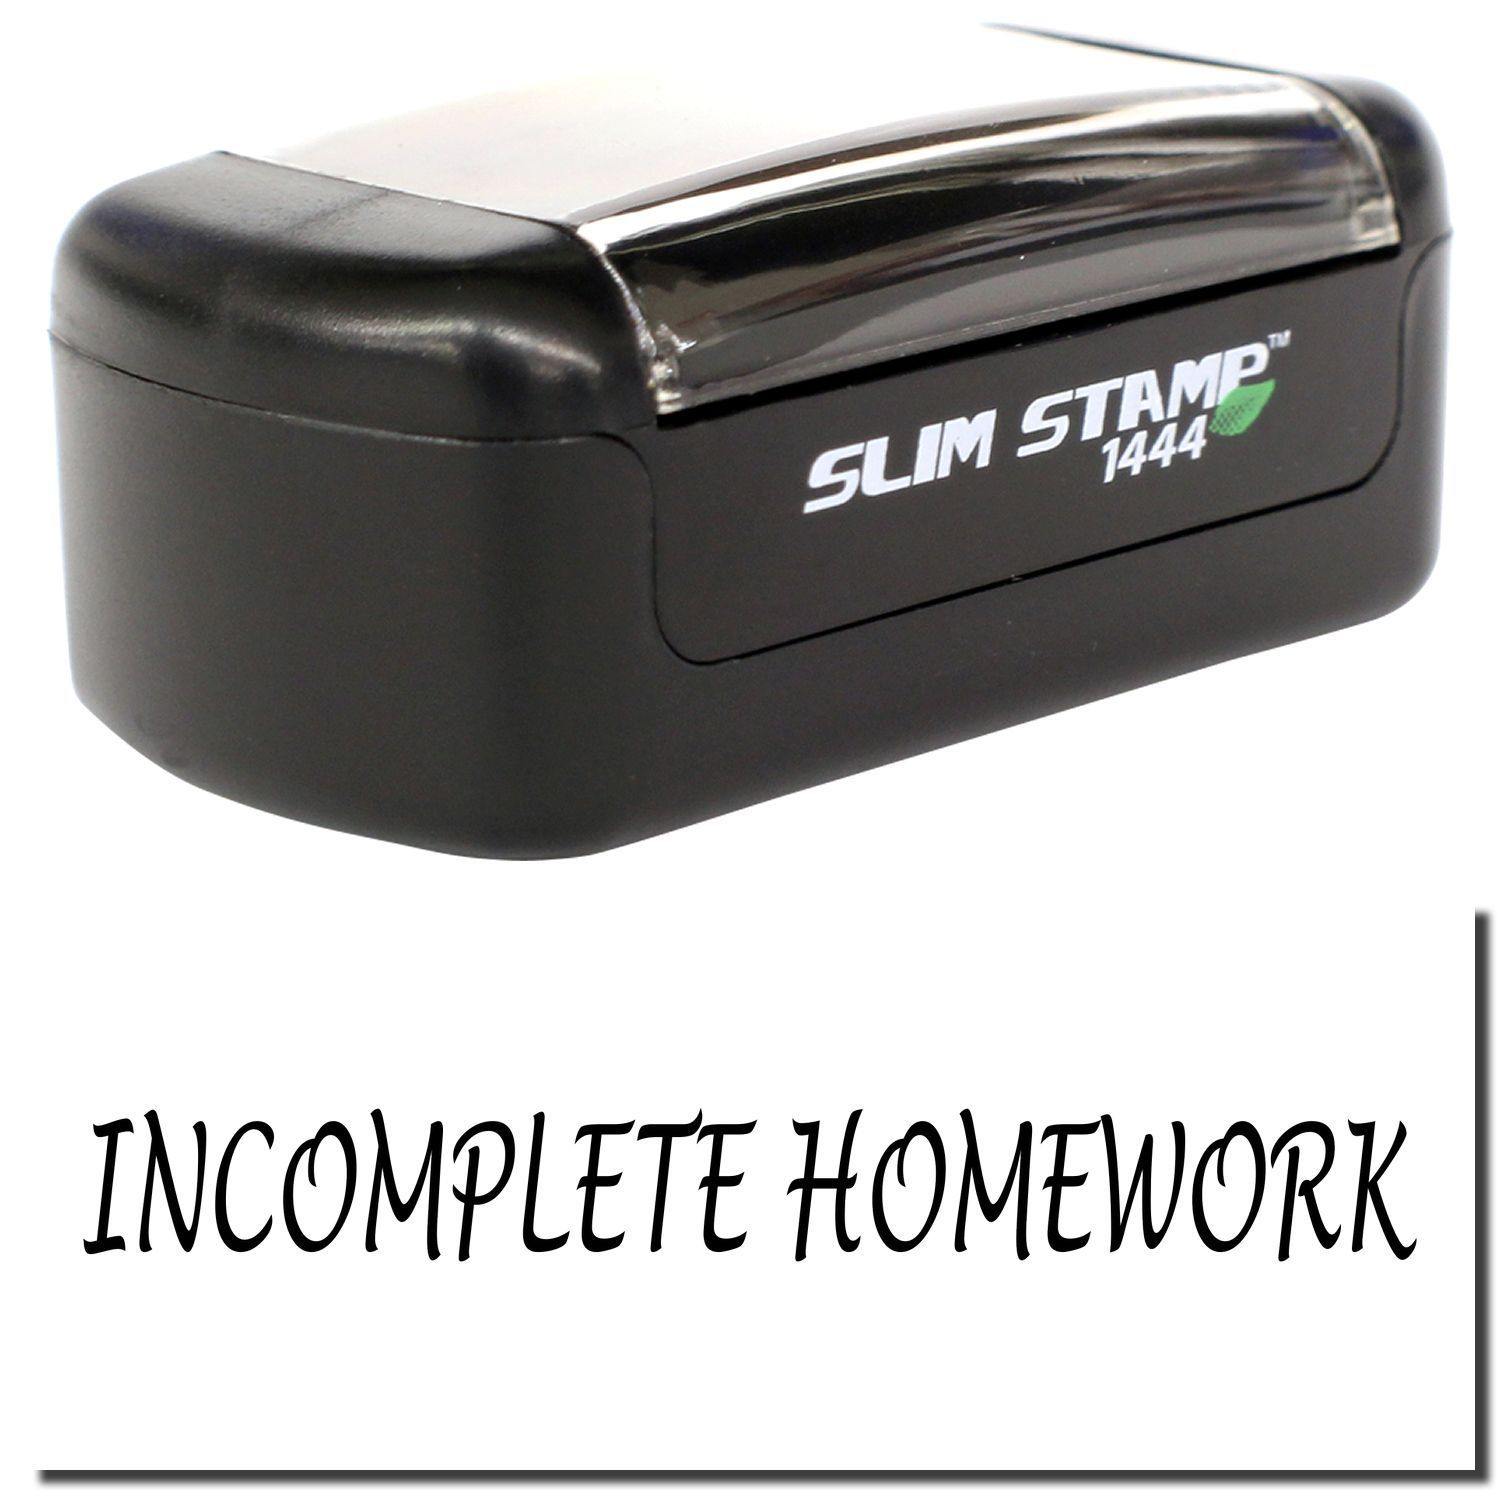 A stock office pre-inked stamp with a stamped image showing how the text "INCOMPLETE HOMEWORK" is displayed after stamping.